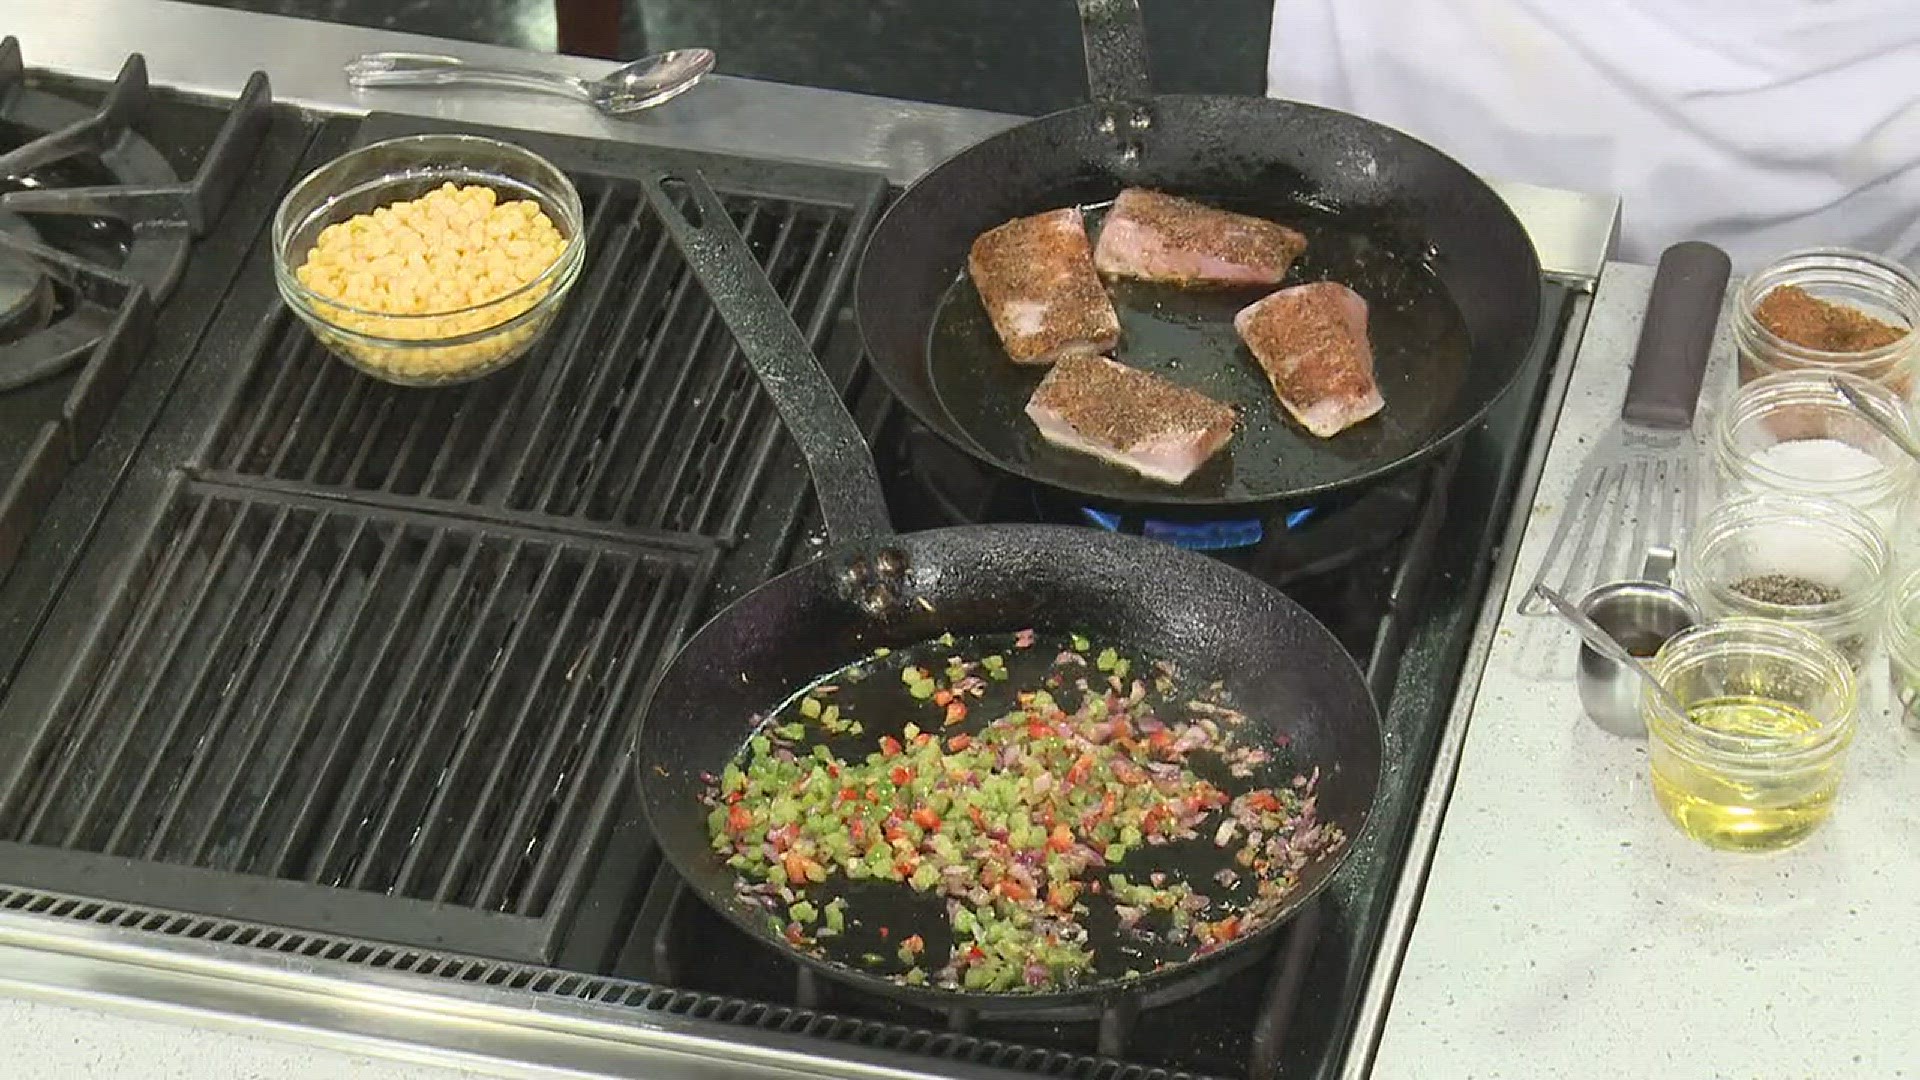 All summer long you can get free cooking lessons from some of the city's top chefs. Executive chef at Redfish Grill Austin Kirzner gives us a sneak peek at his class coming up this Friday night.